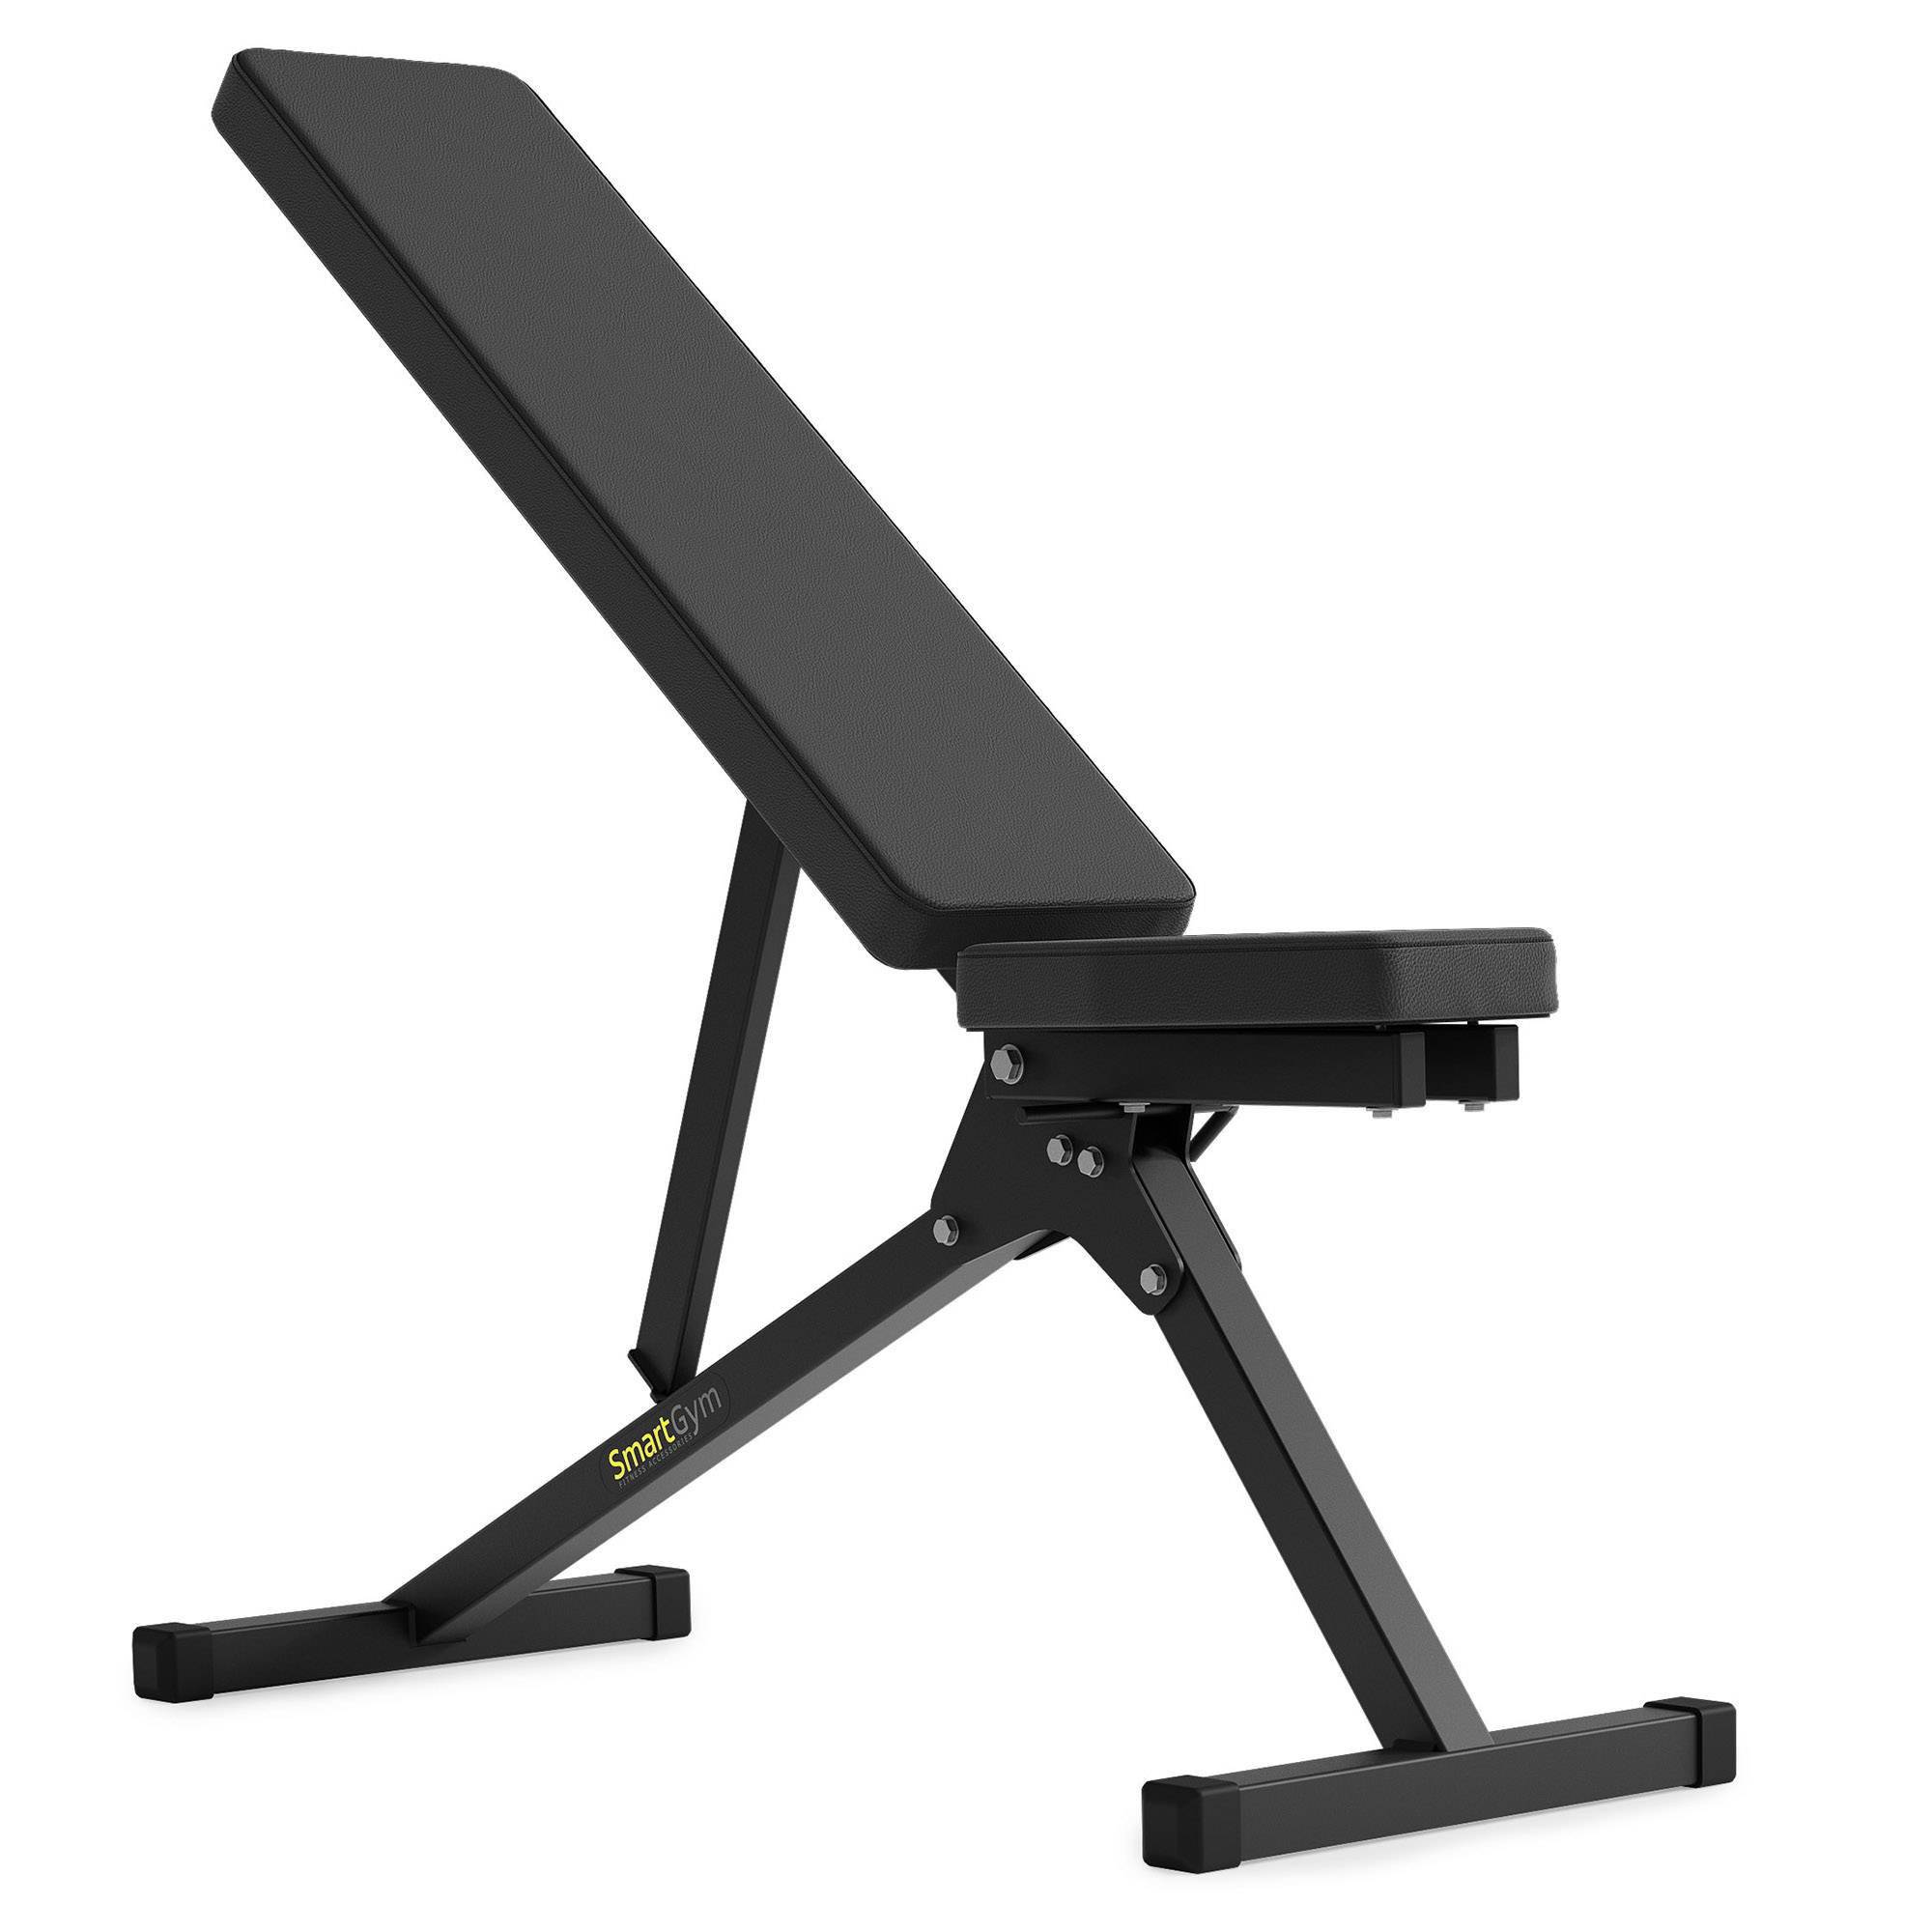 Adjustable bench SG-11 - Benches Strength benches equipment | Training Accessories Fitness SmartGym \\ \\